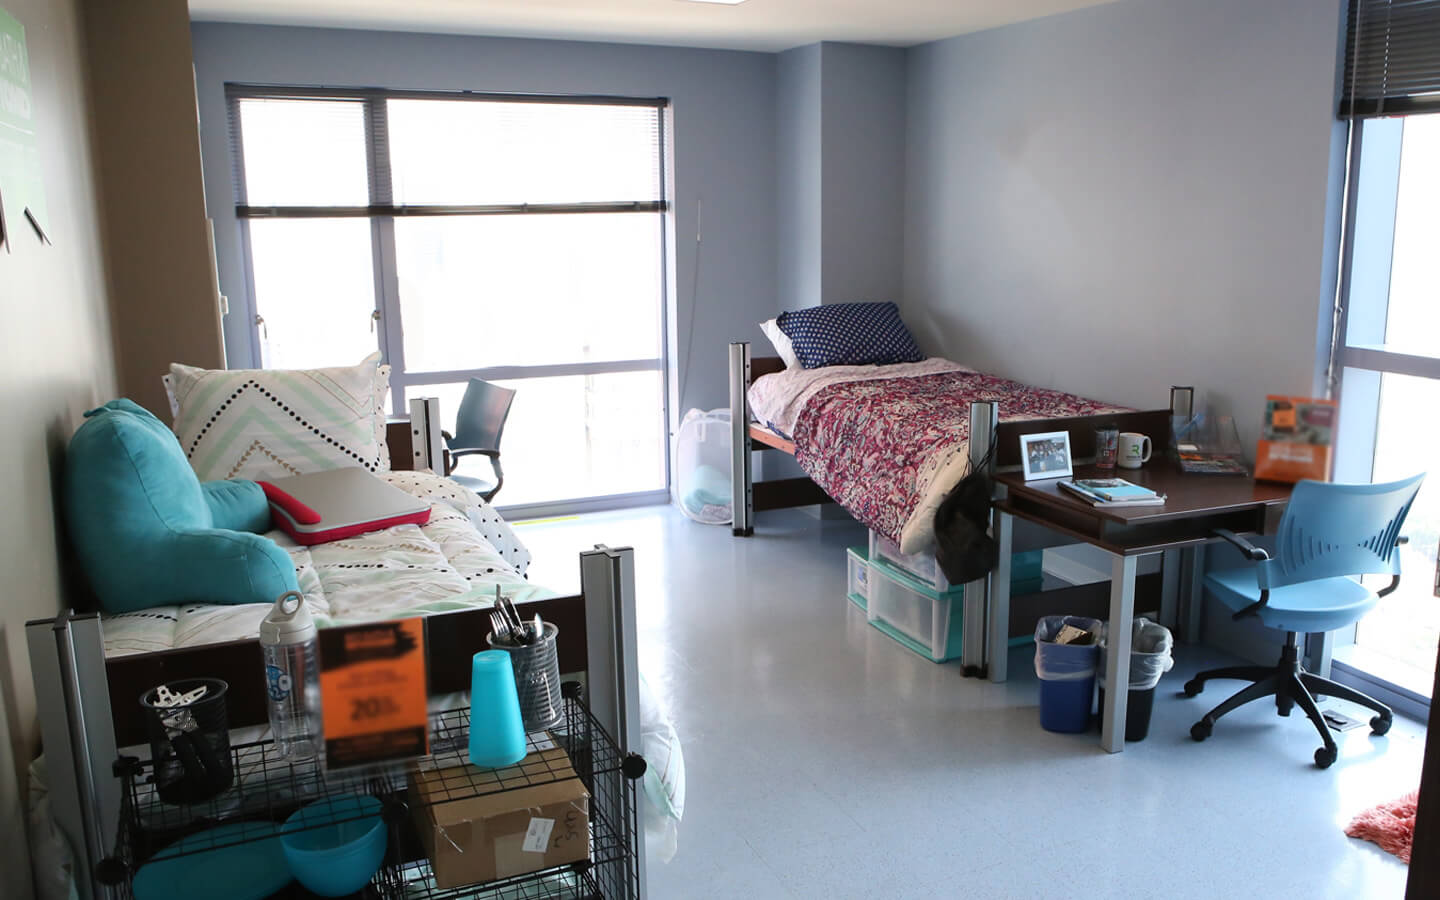 This is one of RU’s double occupancy rooms. As a residential student, you will live in the second-tallest university building in the U.S., which offers unforgettable views of downtown Chicago.